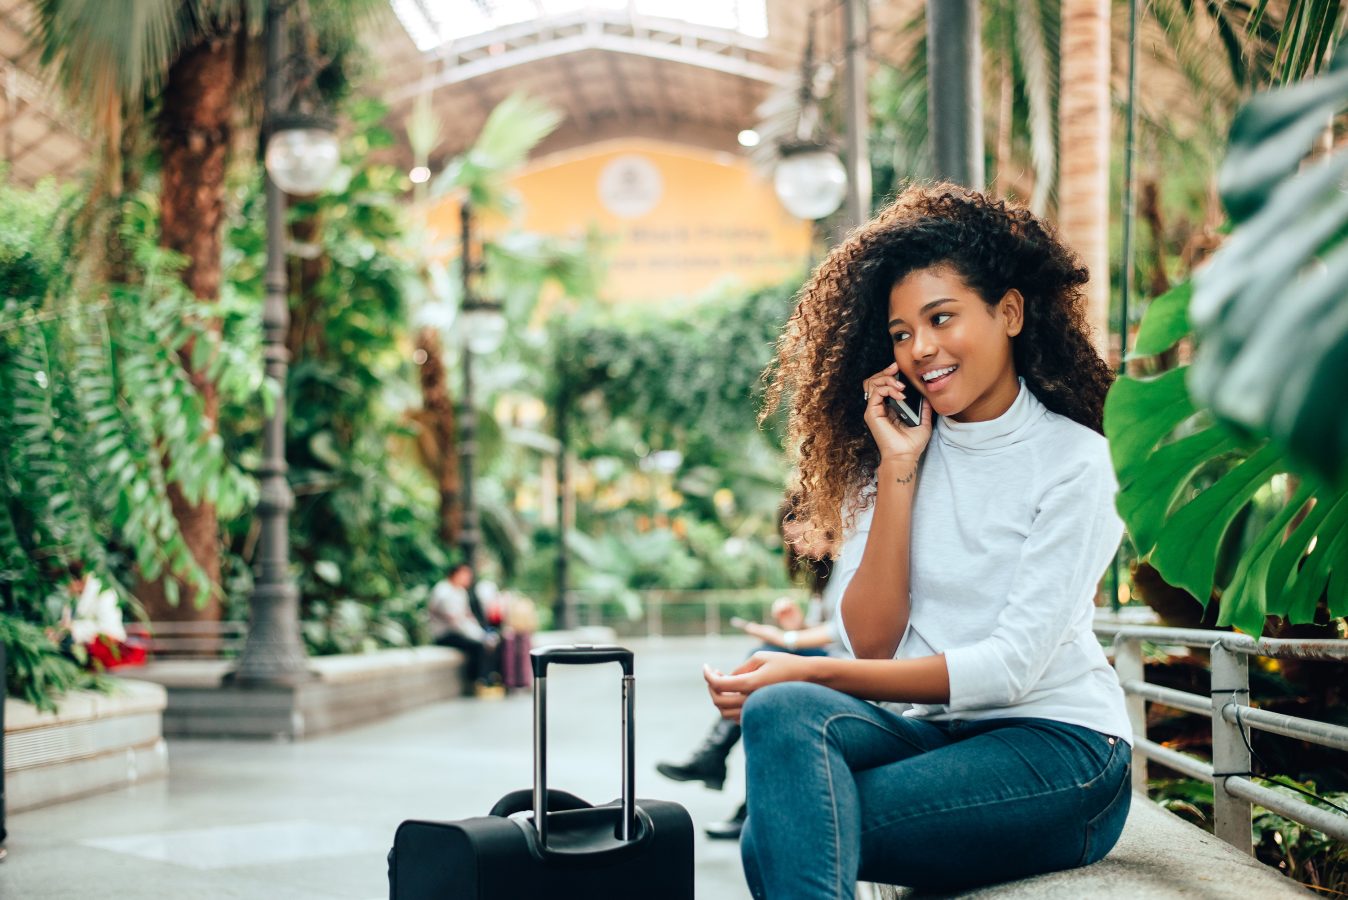 Young woman traveler with her luggage talking on phone.